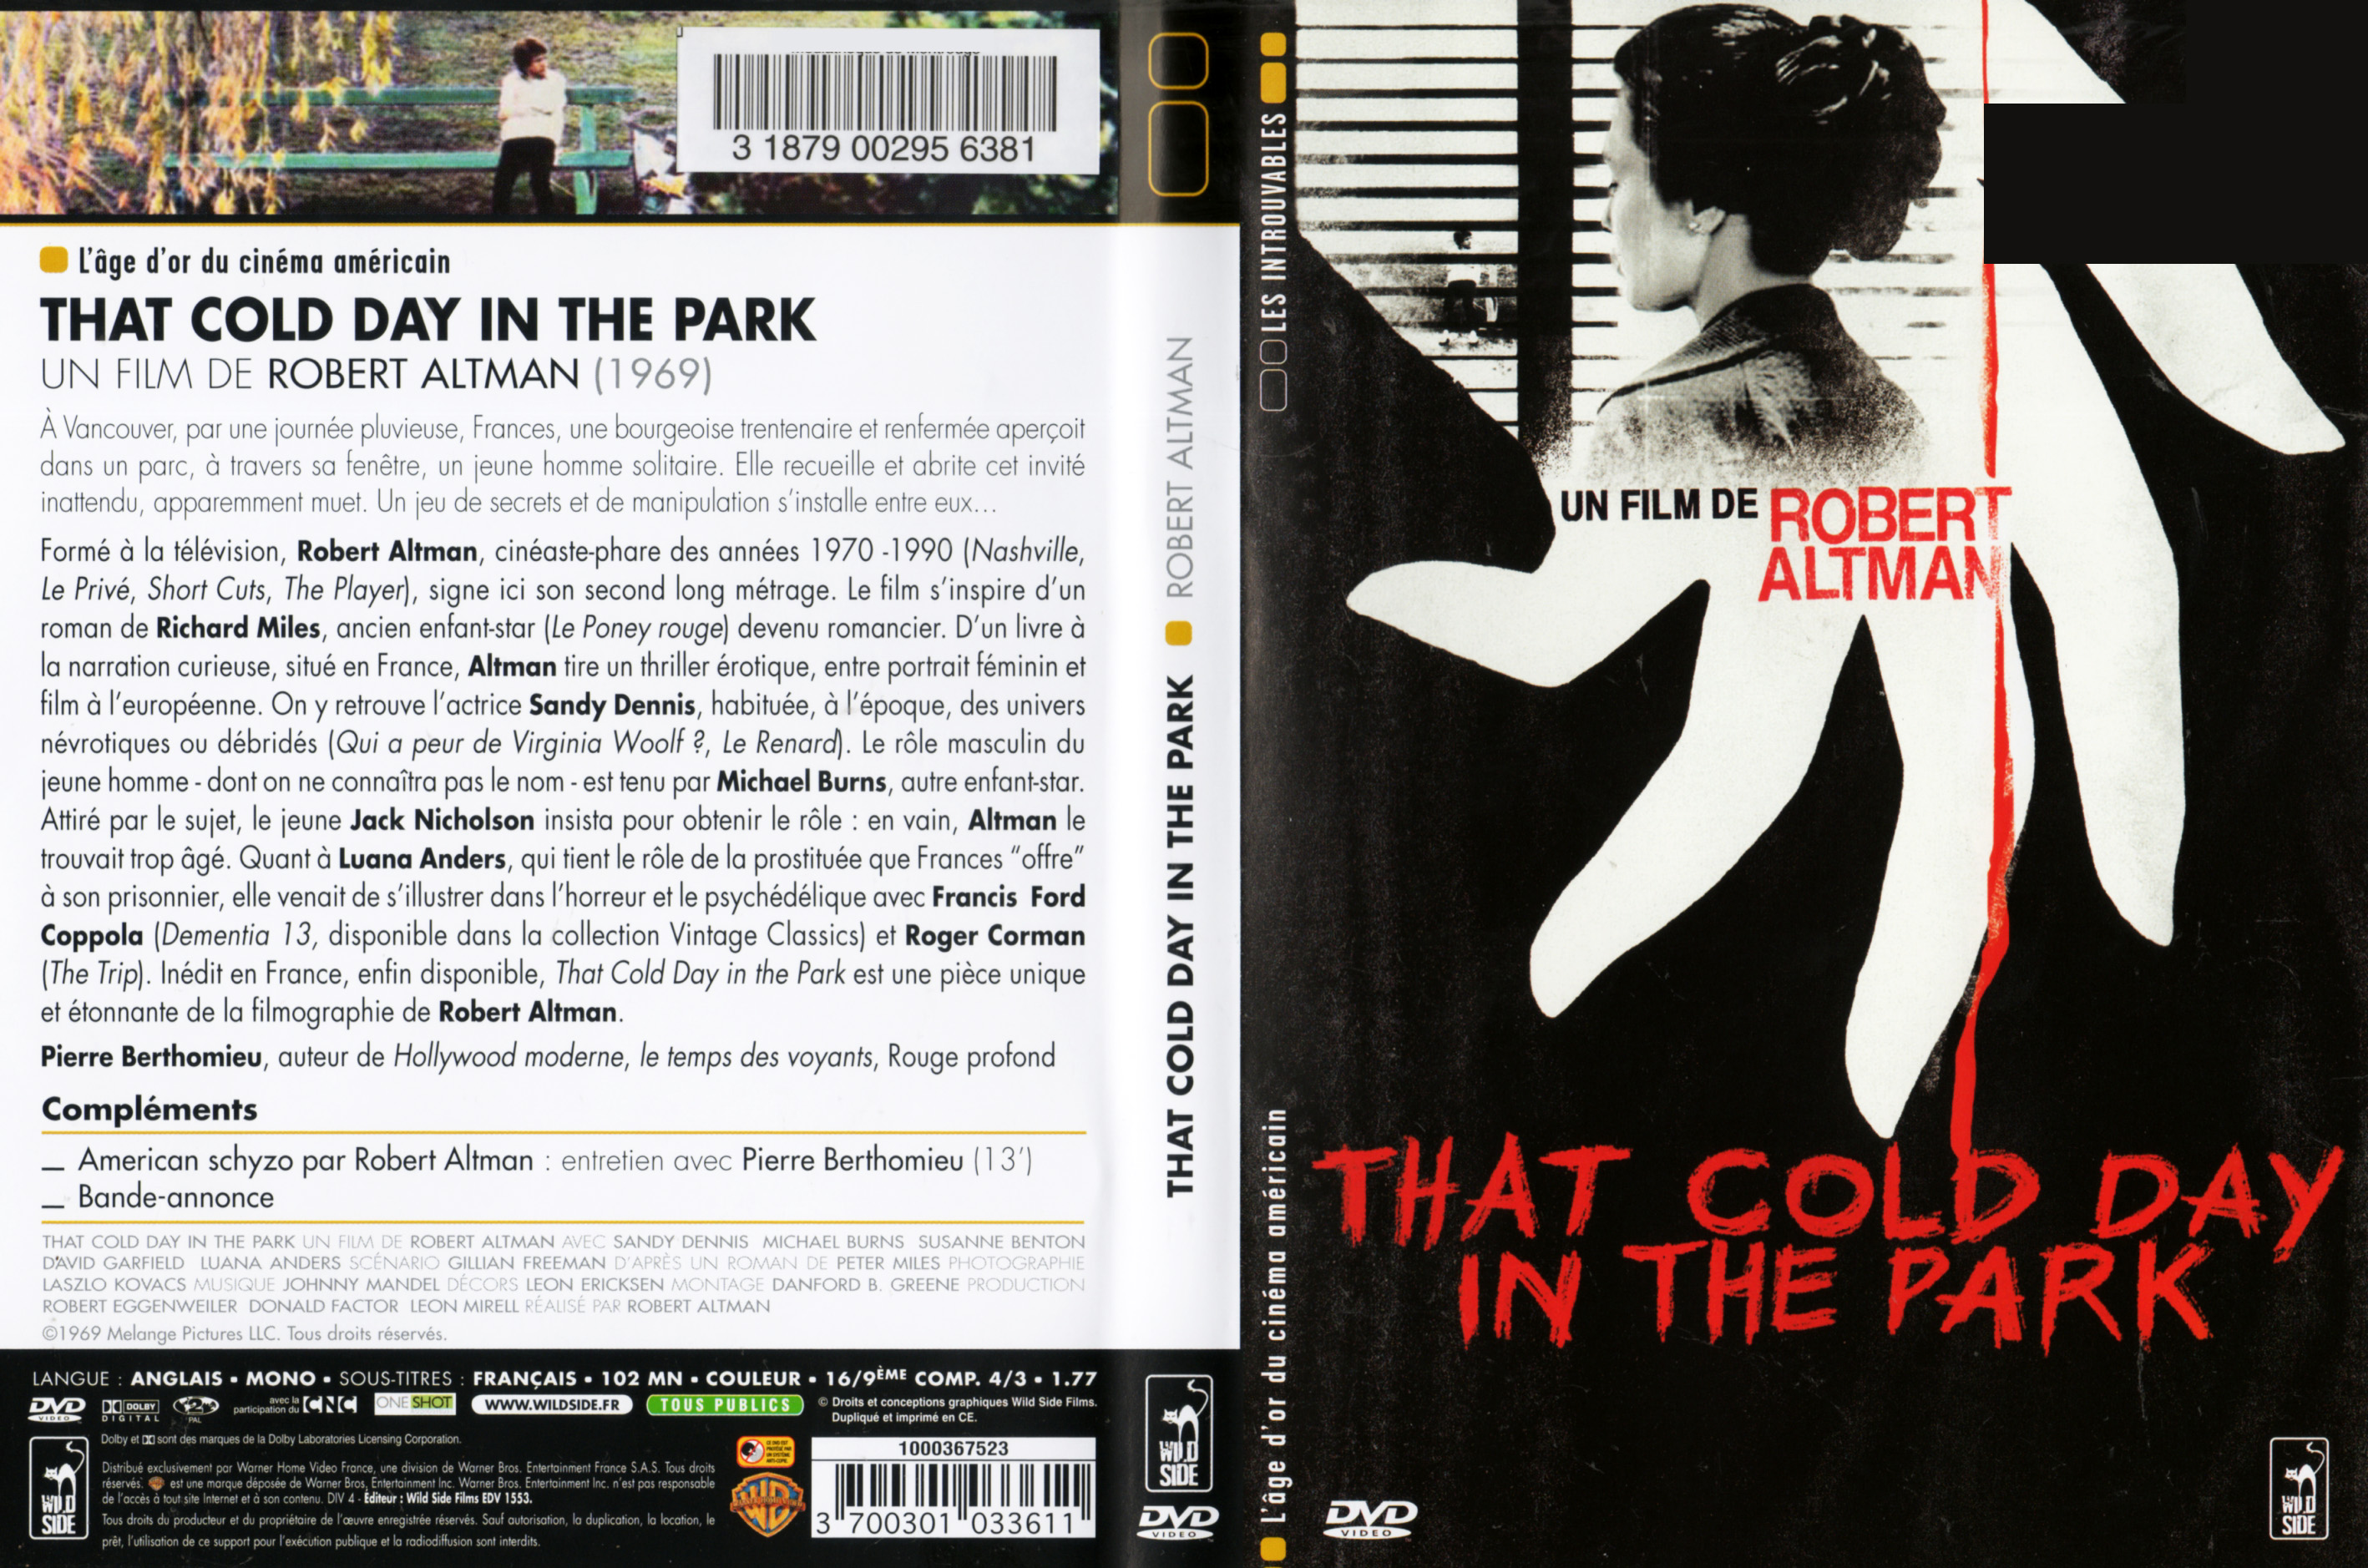 Jaquette DVD That cold day in the park